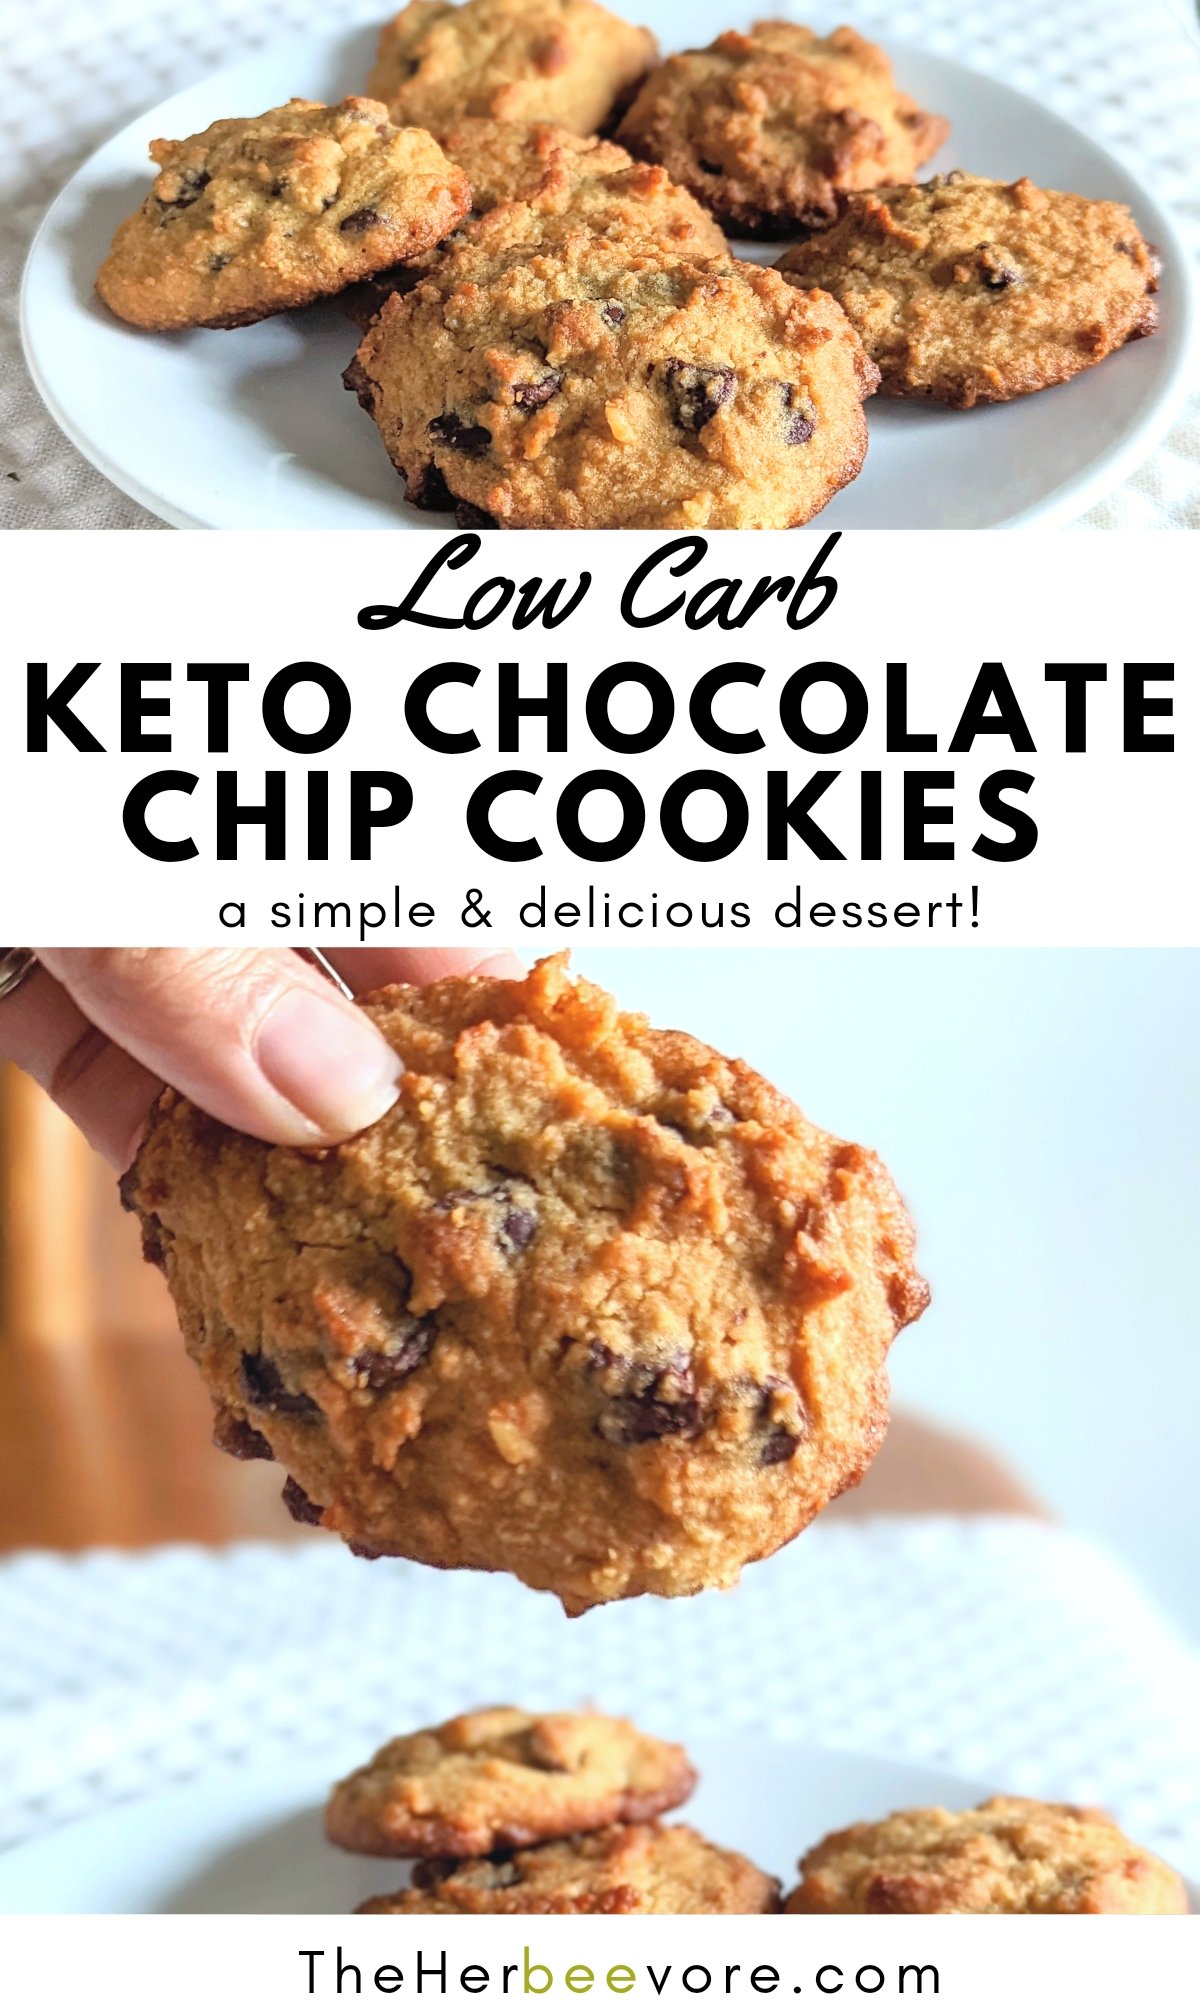 low carb keto chocolate chip cookies with almond flour and semi sweet dark chocolate chips easy homemade low carbohydrate chocolate chip cookies